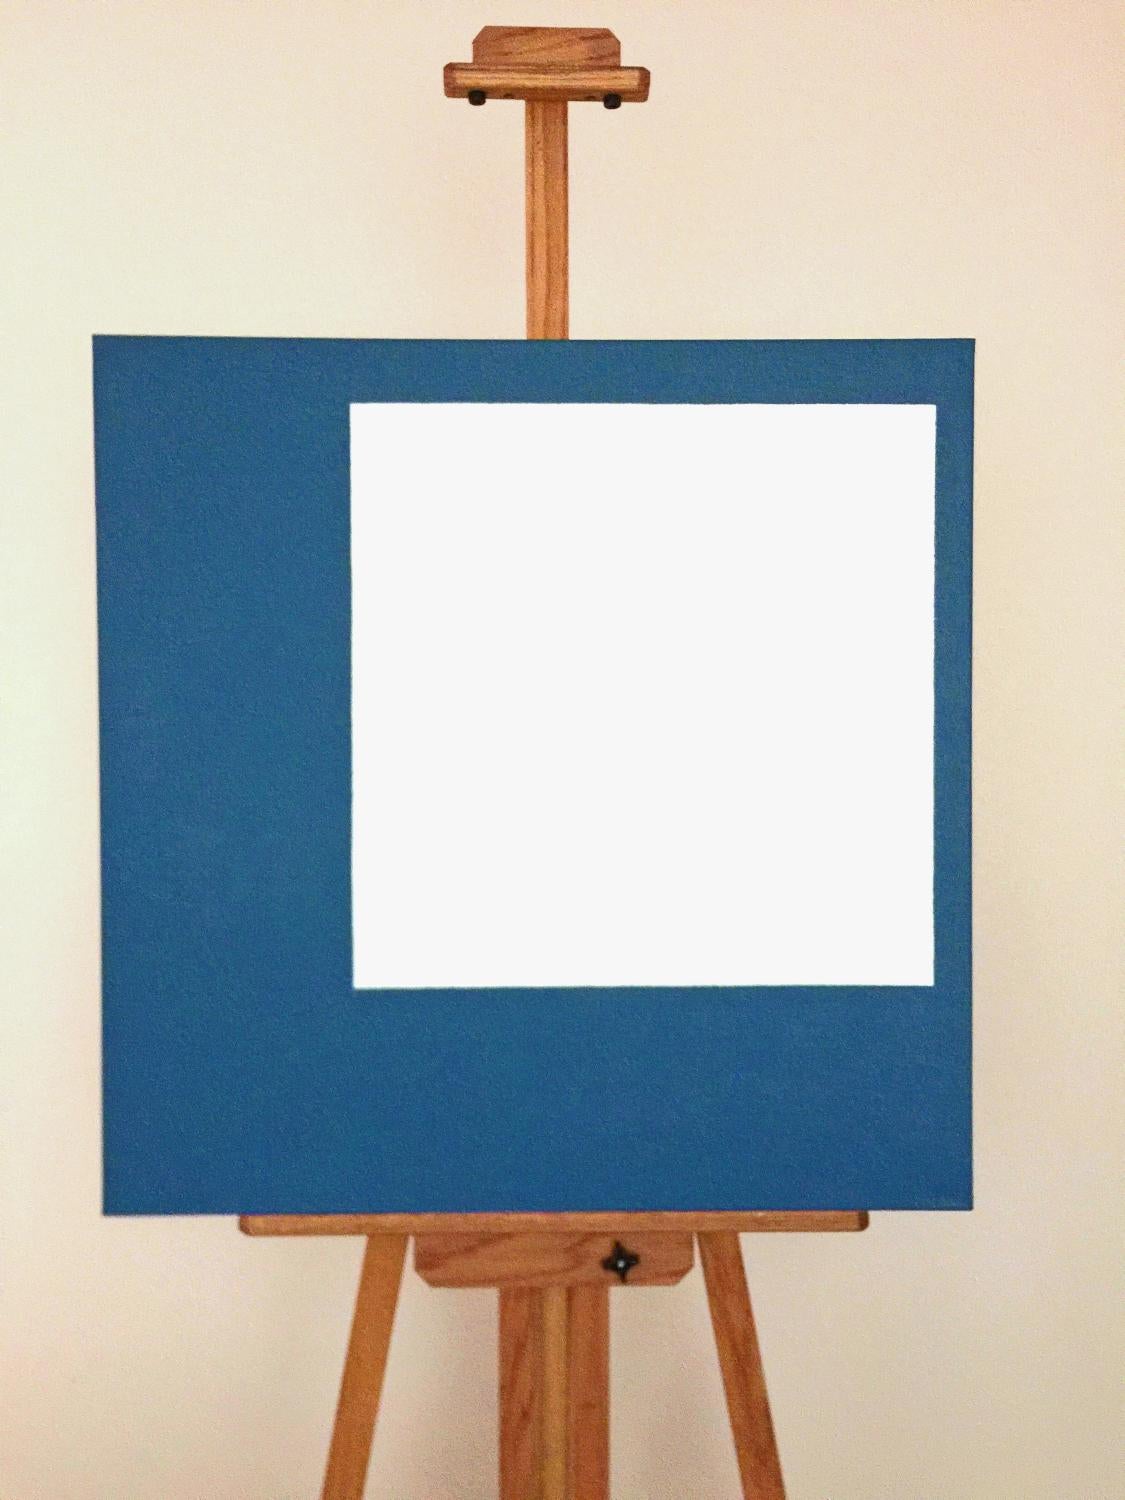 <p>Artist Comments<br>Artist Shyun Song conceptualizes a minimalist geometric composition with clean linear forms. She paints the canvas a deep-sea blue implying the unpredictability of life. The negative space in a square stands for the firm